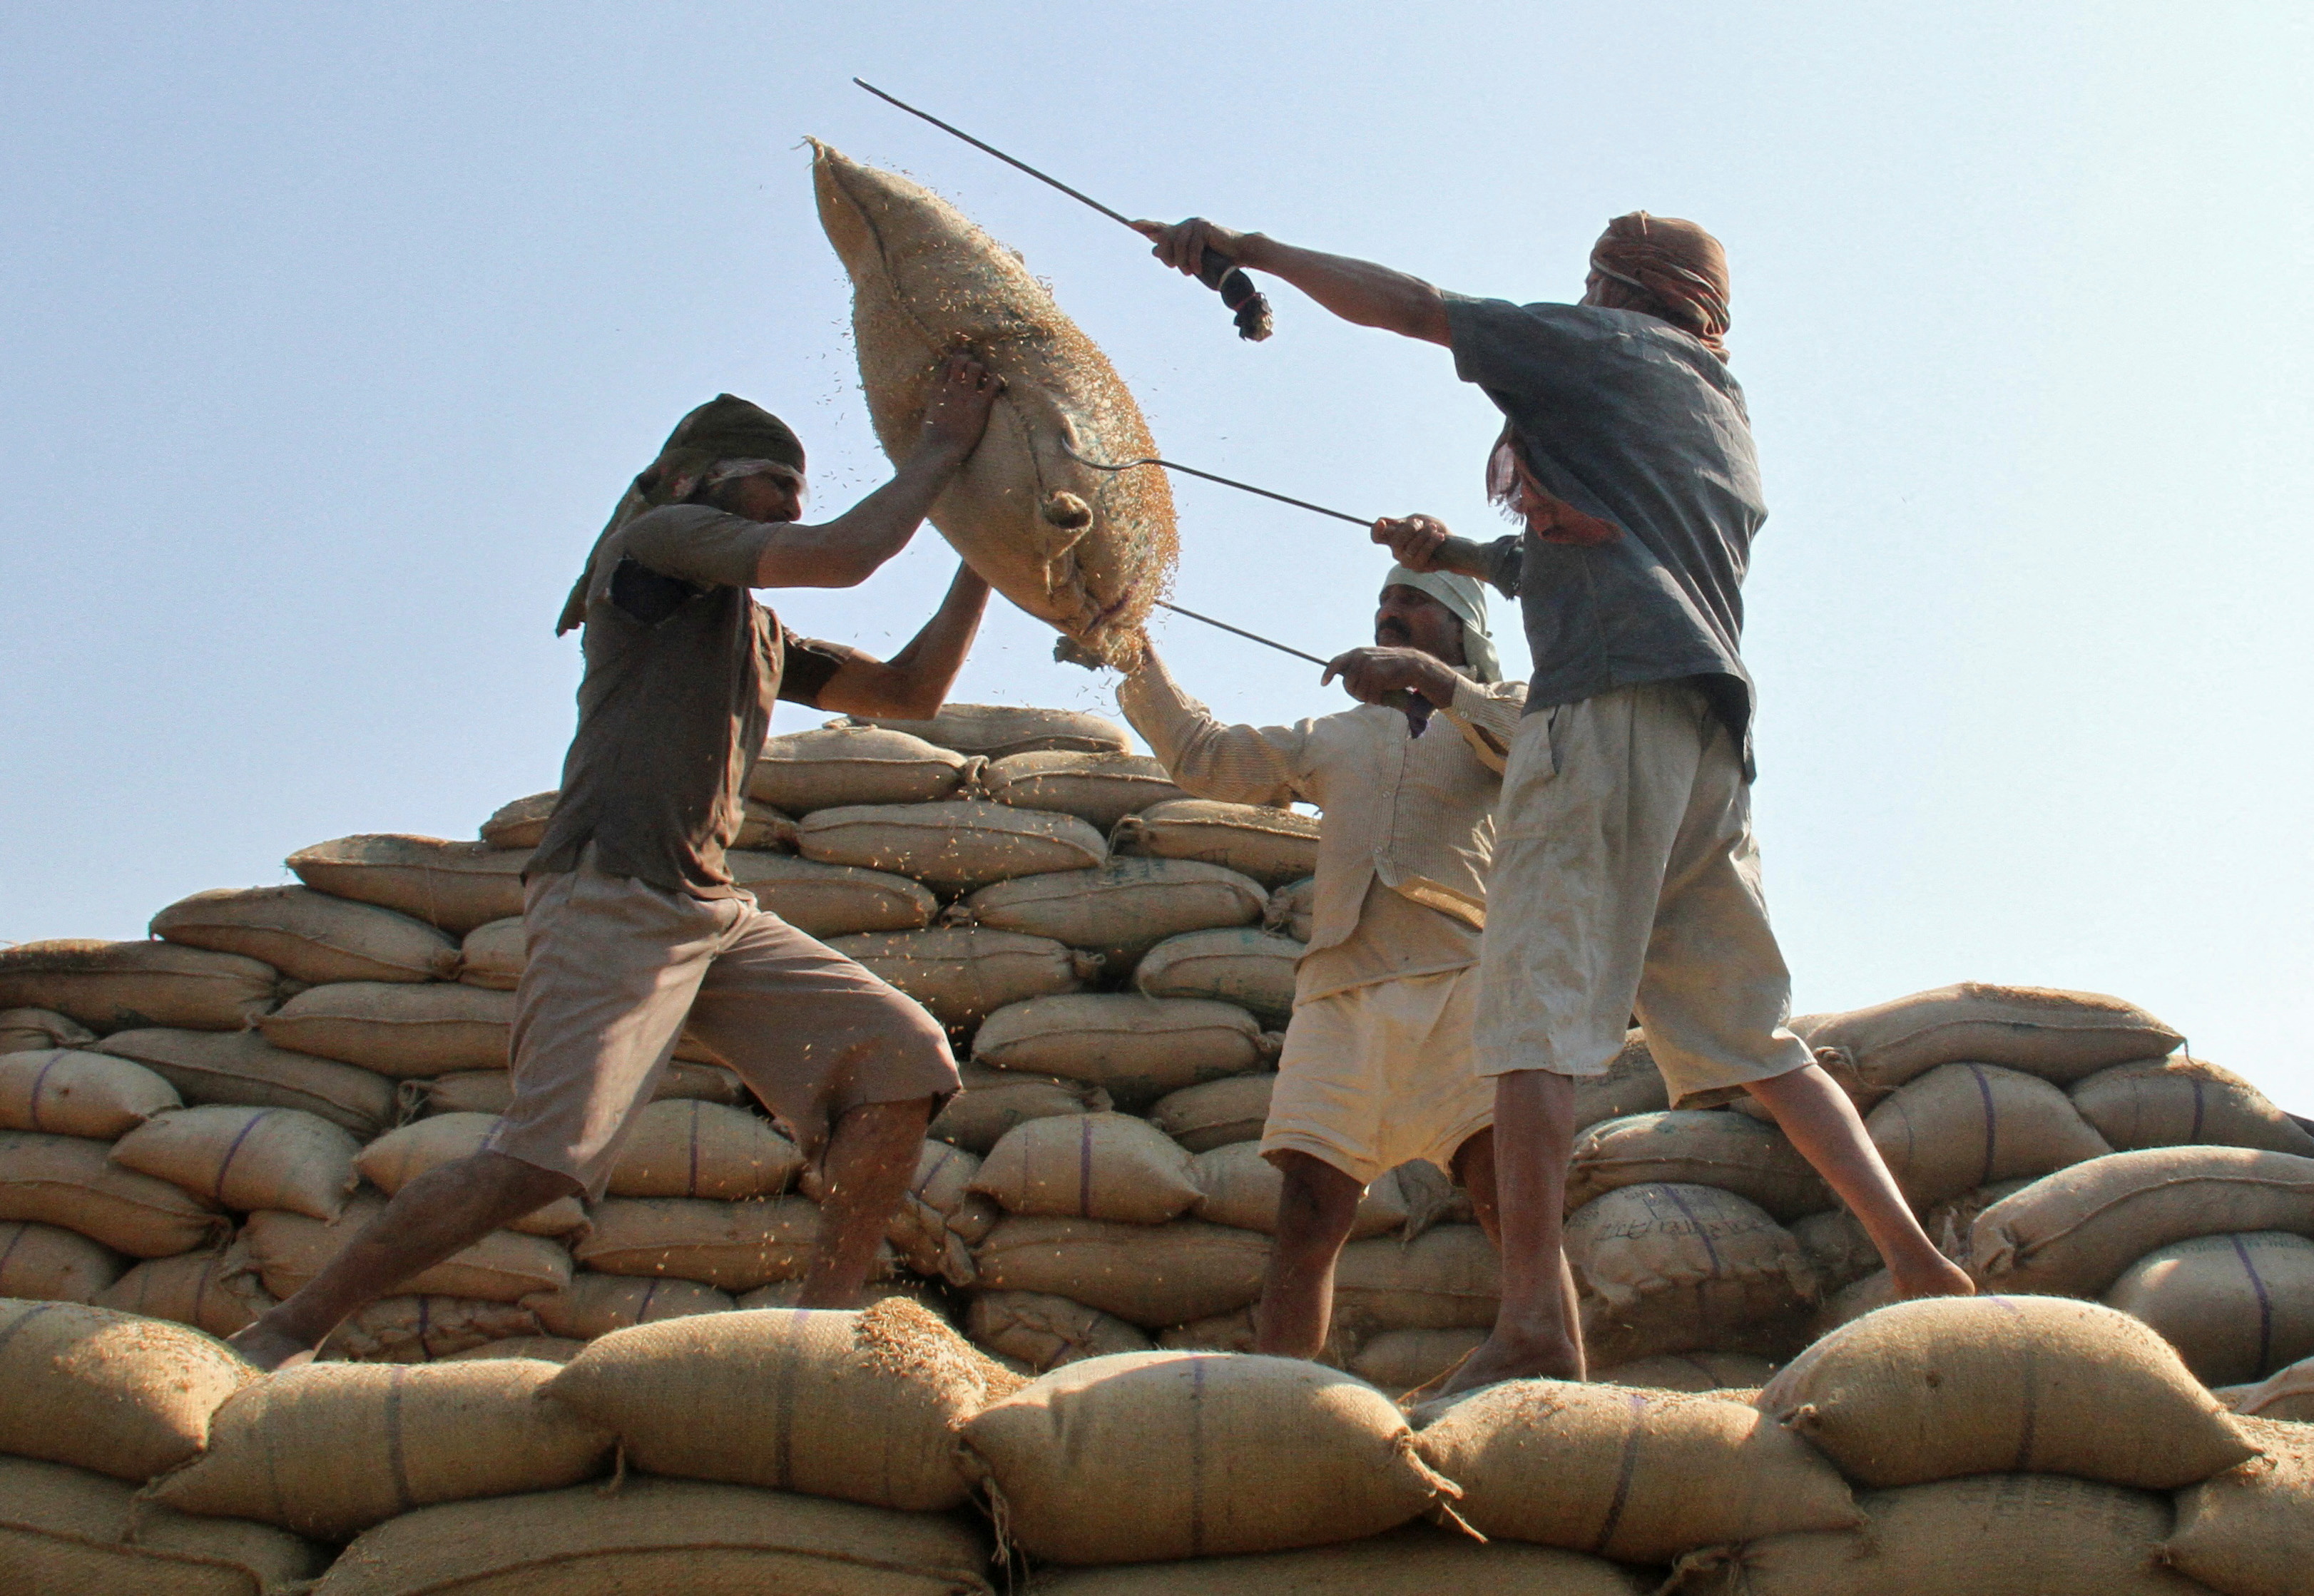 Workers lift a sack of rice to load onto a truck at a wholesale grain market in the northern Indian city of Chandigarh February 9, 2012. REUTERS/Ajay Verma/File Photo